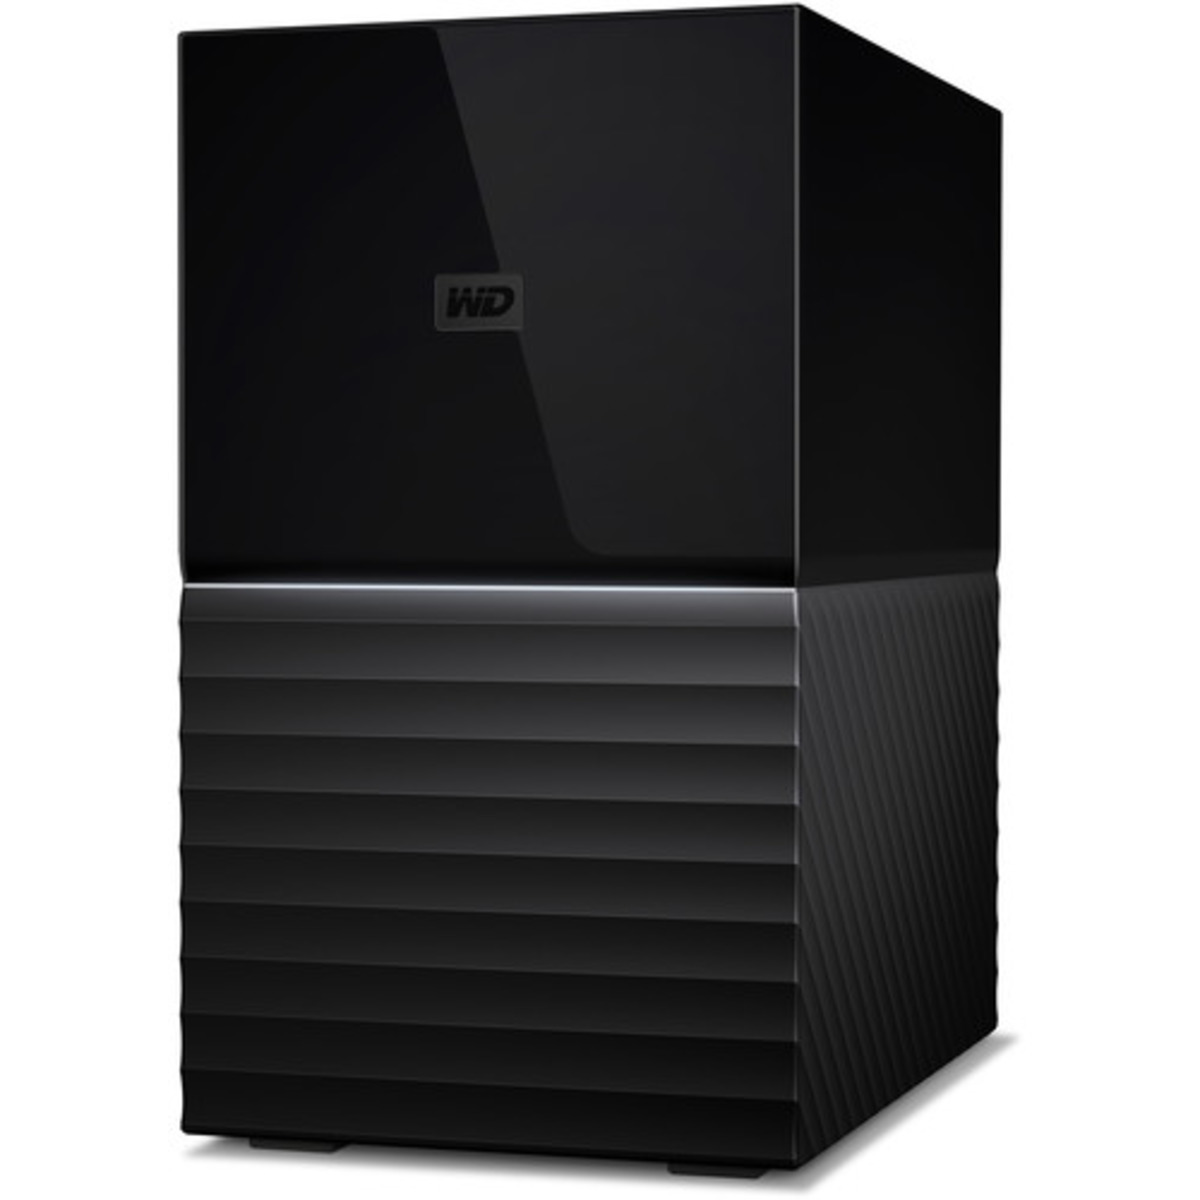 buy $431 Western Digital My Book DUO Gen 2 6tb Desktop DAS - Direct Attached Storage Device 2x3000gb Western Digital Blue WD30EZRZ 3.5 5400rpm SATA 6Gb/s HDD CONSUMER Class Drives Installed - Burn-In Tested - ON SALE - nas headquarters buy network attached storage server device das new raid-5 free shipping usa christmas new year holiday sale My Book DUO Gen 2